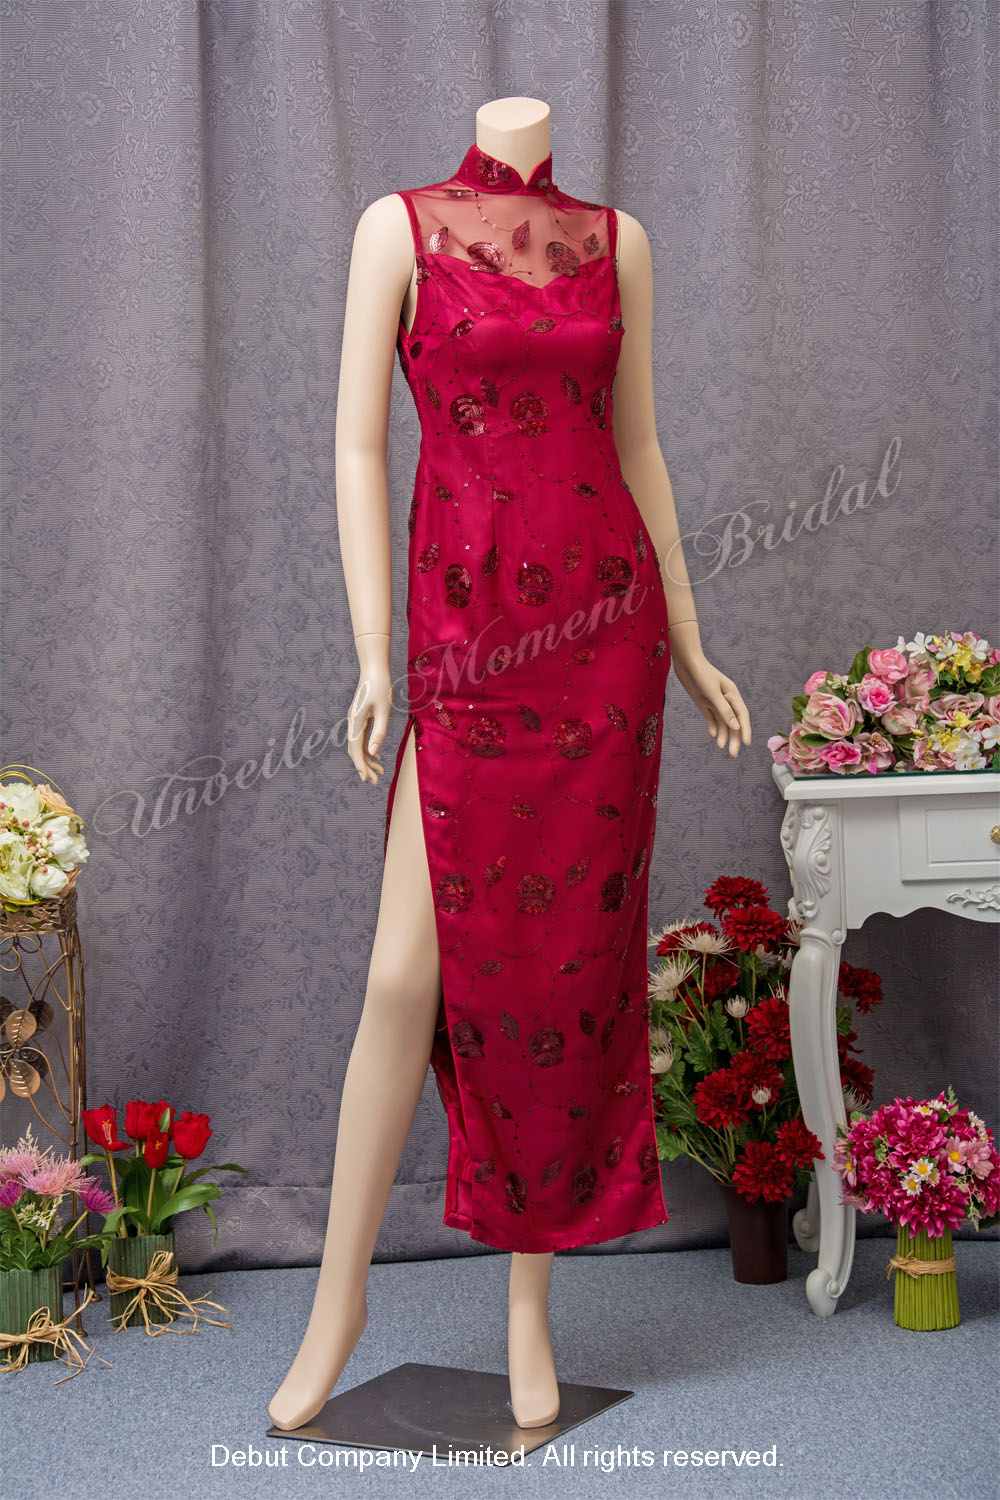 High collar, sleeveless royal red qipao with side slits and embellished with sequins 企領無袖珠片側叉旗袍酒紅色媽咪衫